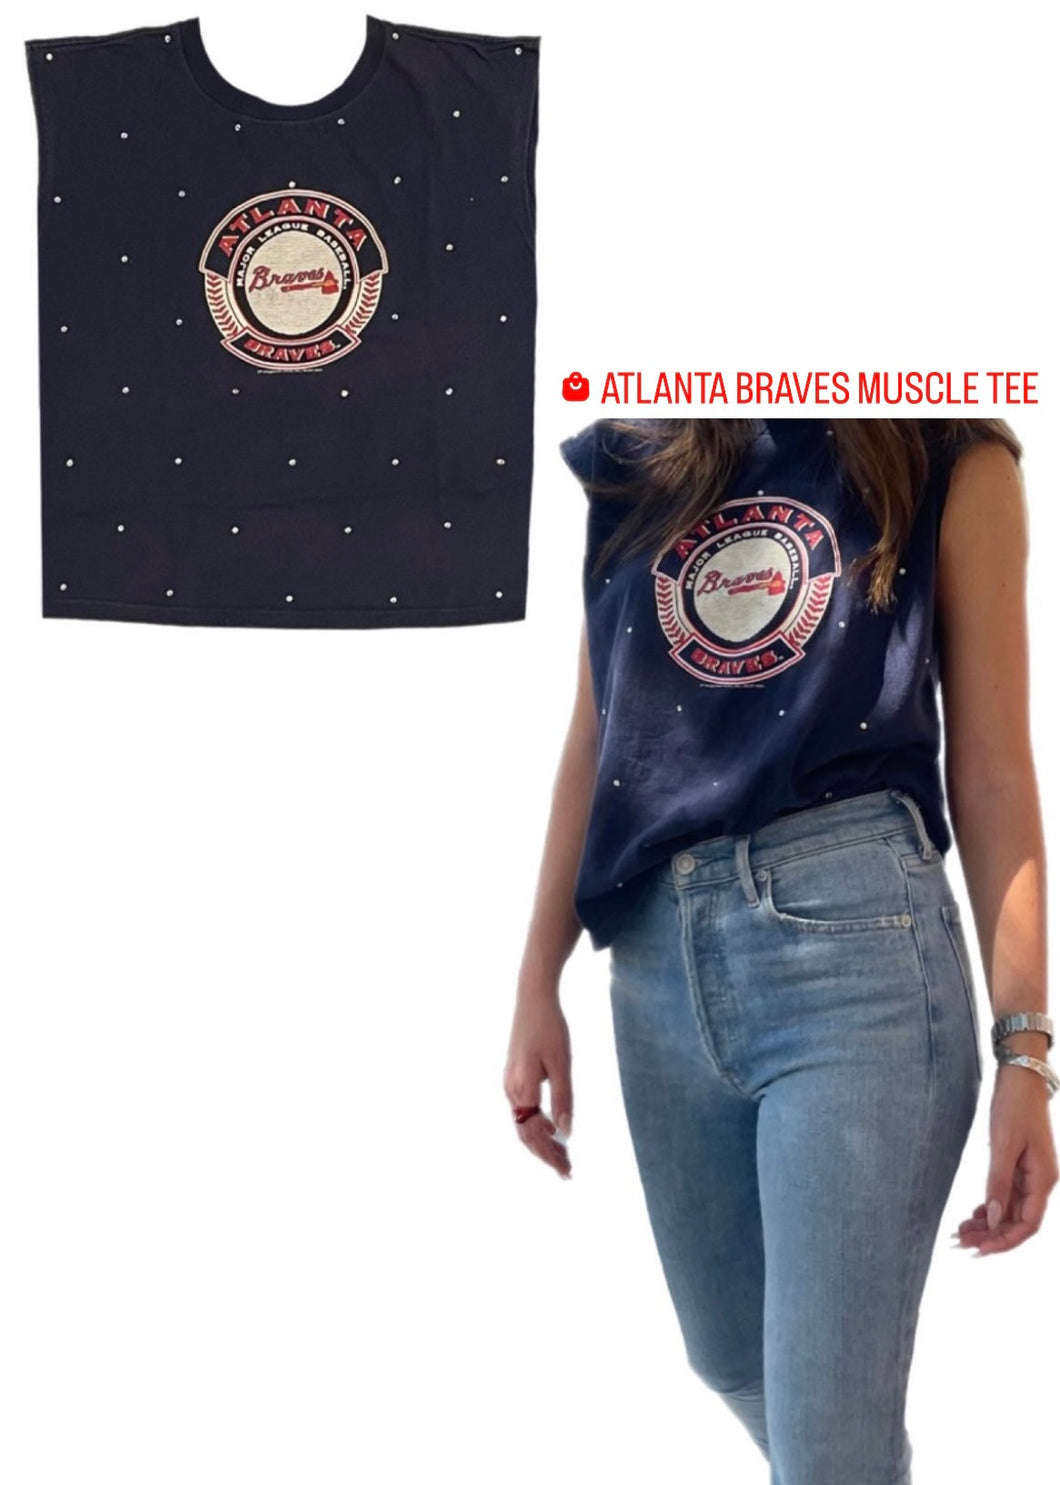 Atlanta Braves, NFL One of a KIND Vintage Muscle Tee with Overall Crystal Design